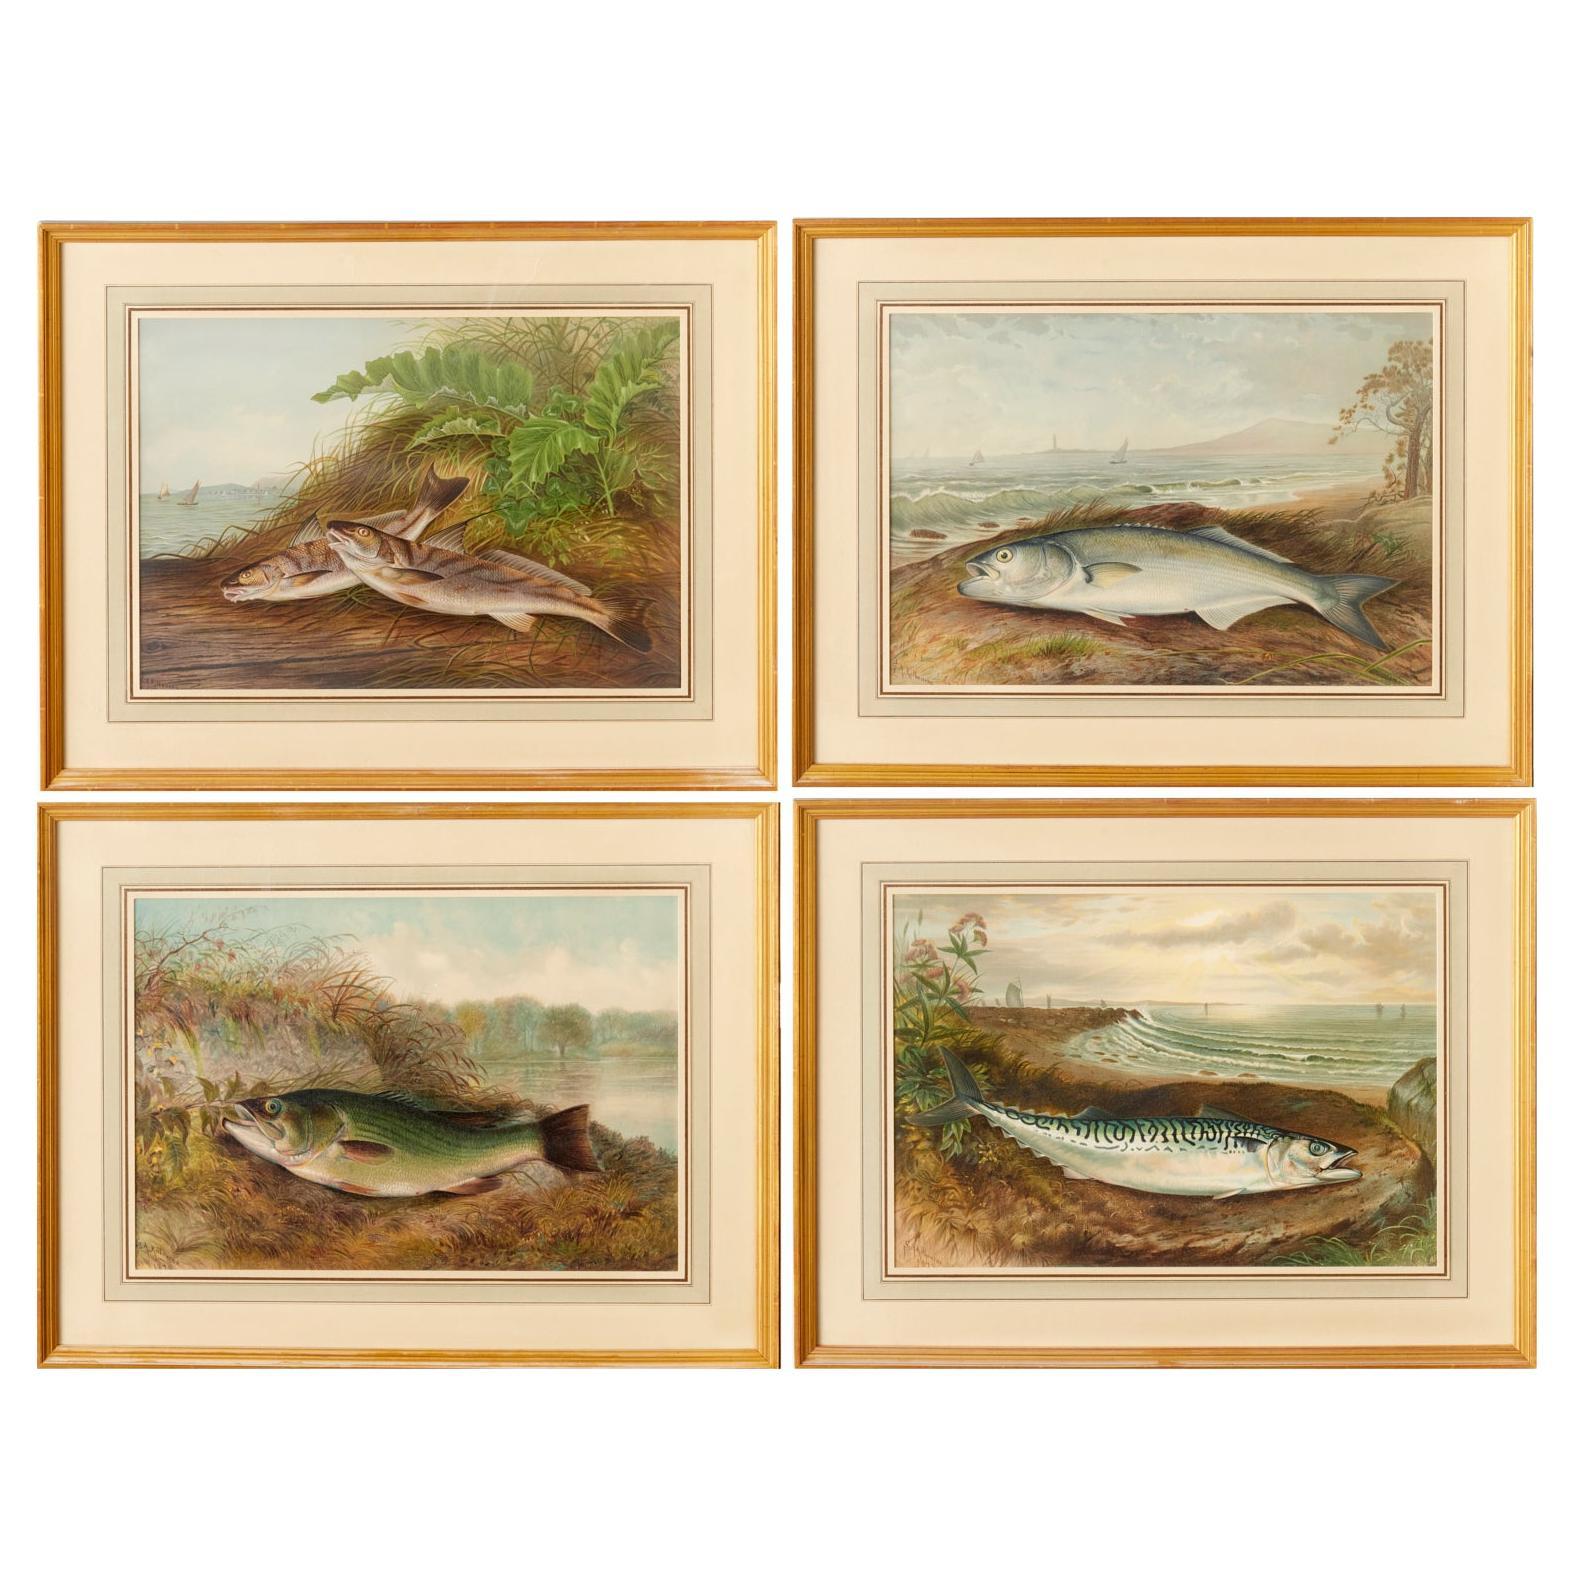 S. A. Kilbourne: „Game Fishes of the United States“, 4 gerahmte Chromolithographien  im Angebot